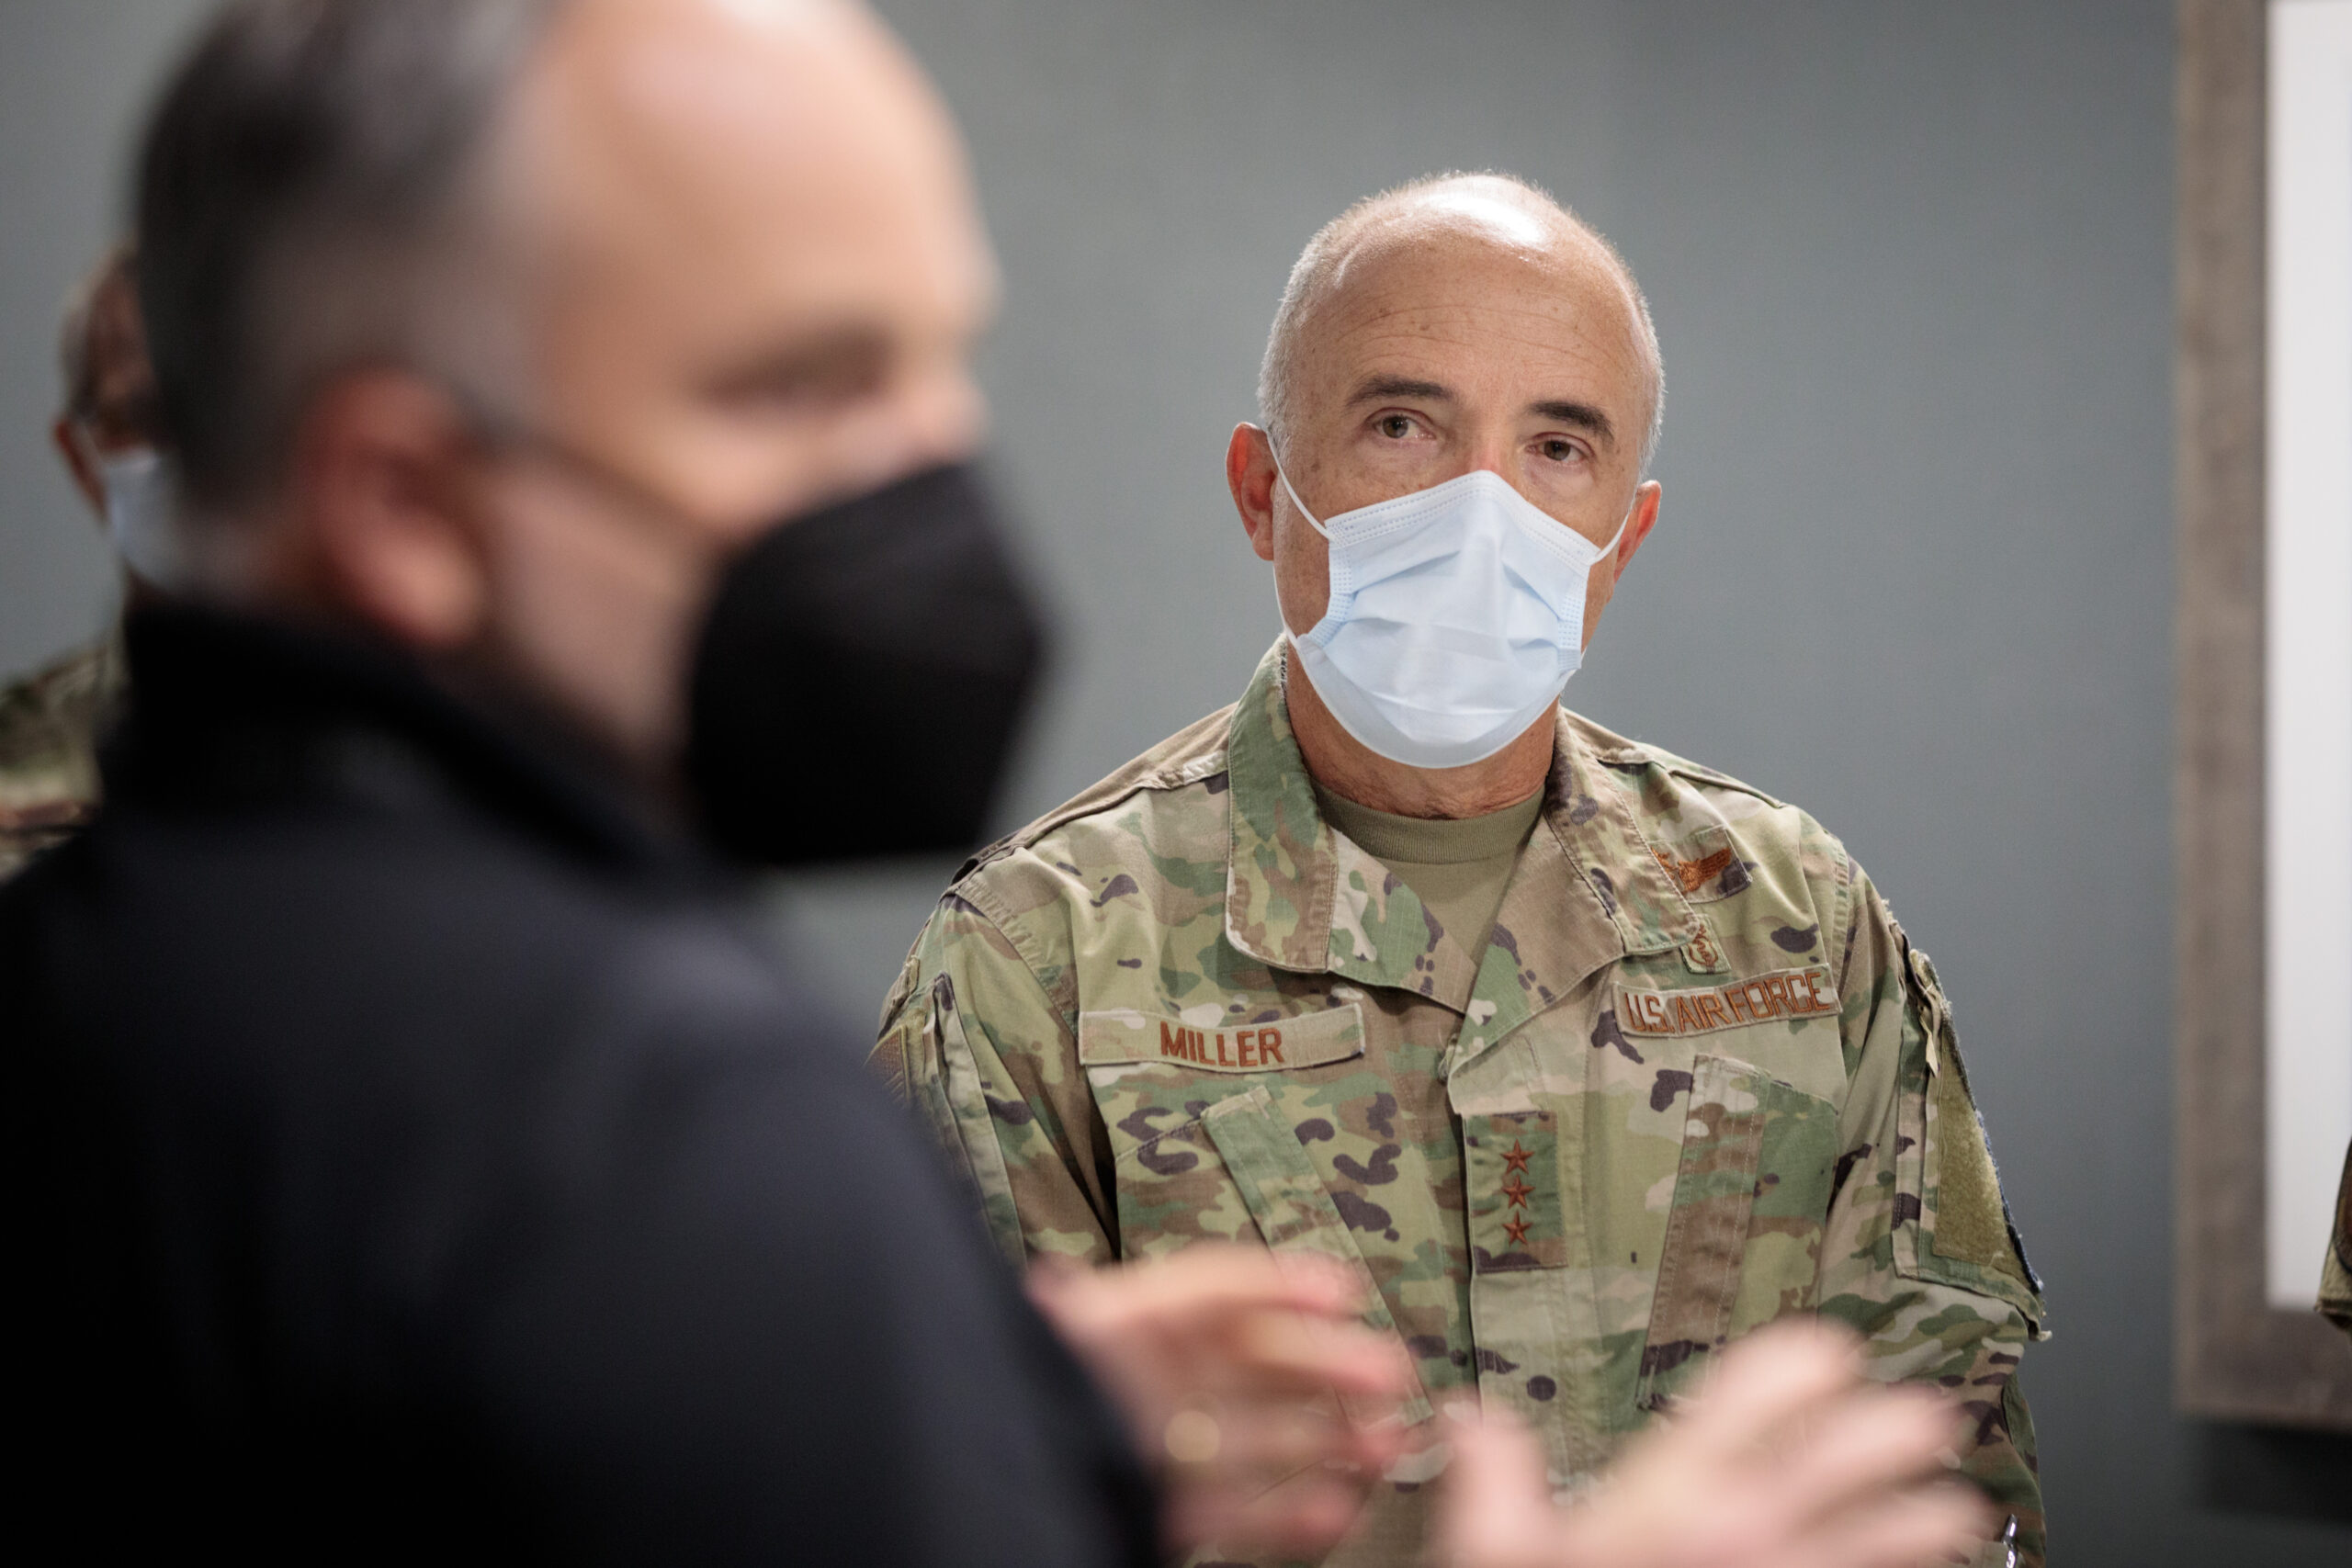 At right&comma; Lieutenant General Robert Miller&comma; MD&comma; surgeon general of the U&period;S&period; Air Force&comma; listens to UNMC&apos;s James Lawler&comma; MD&comma; during a tour of the Davis Global Center and iEXCEL program&period;